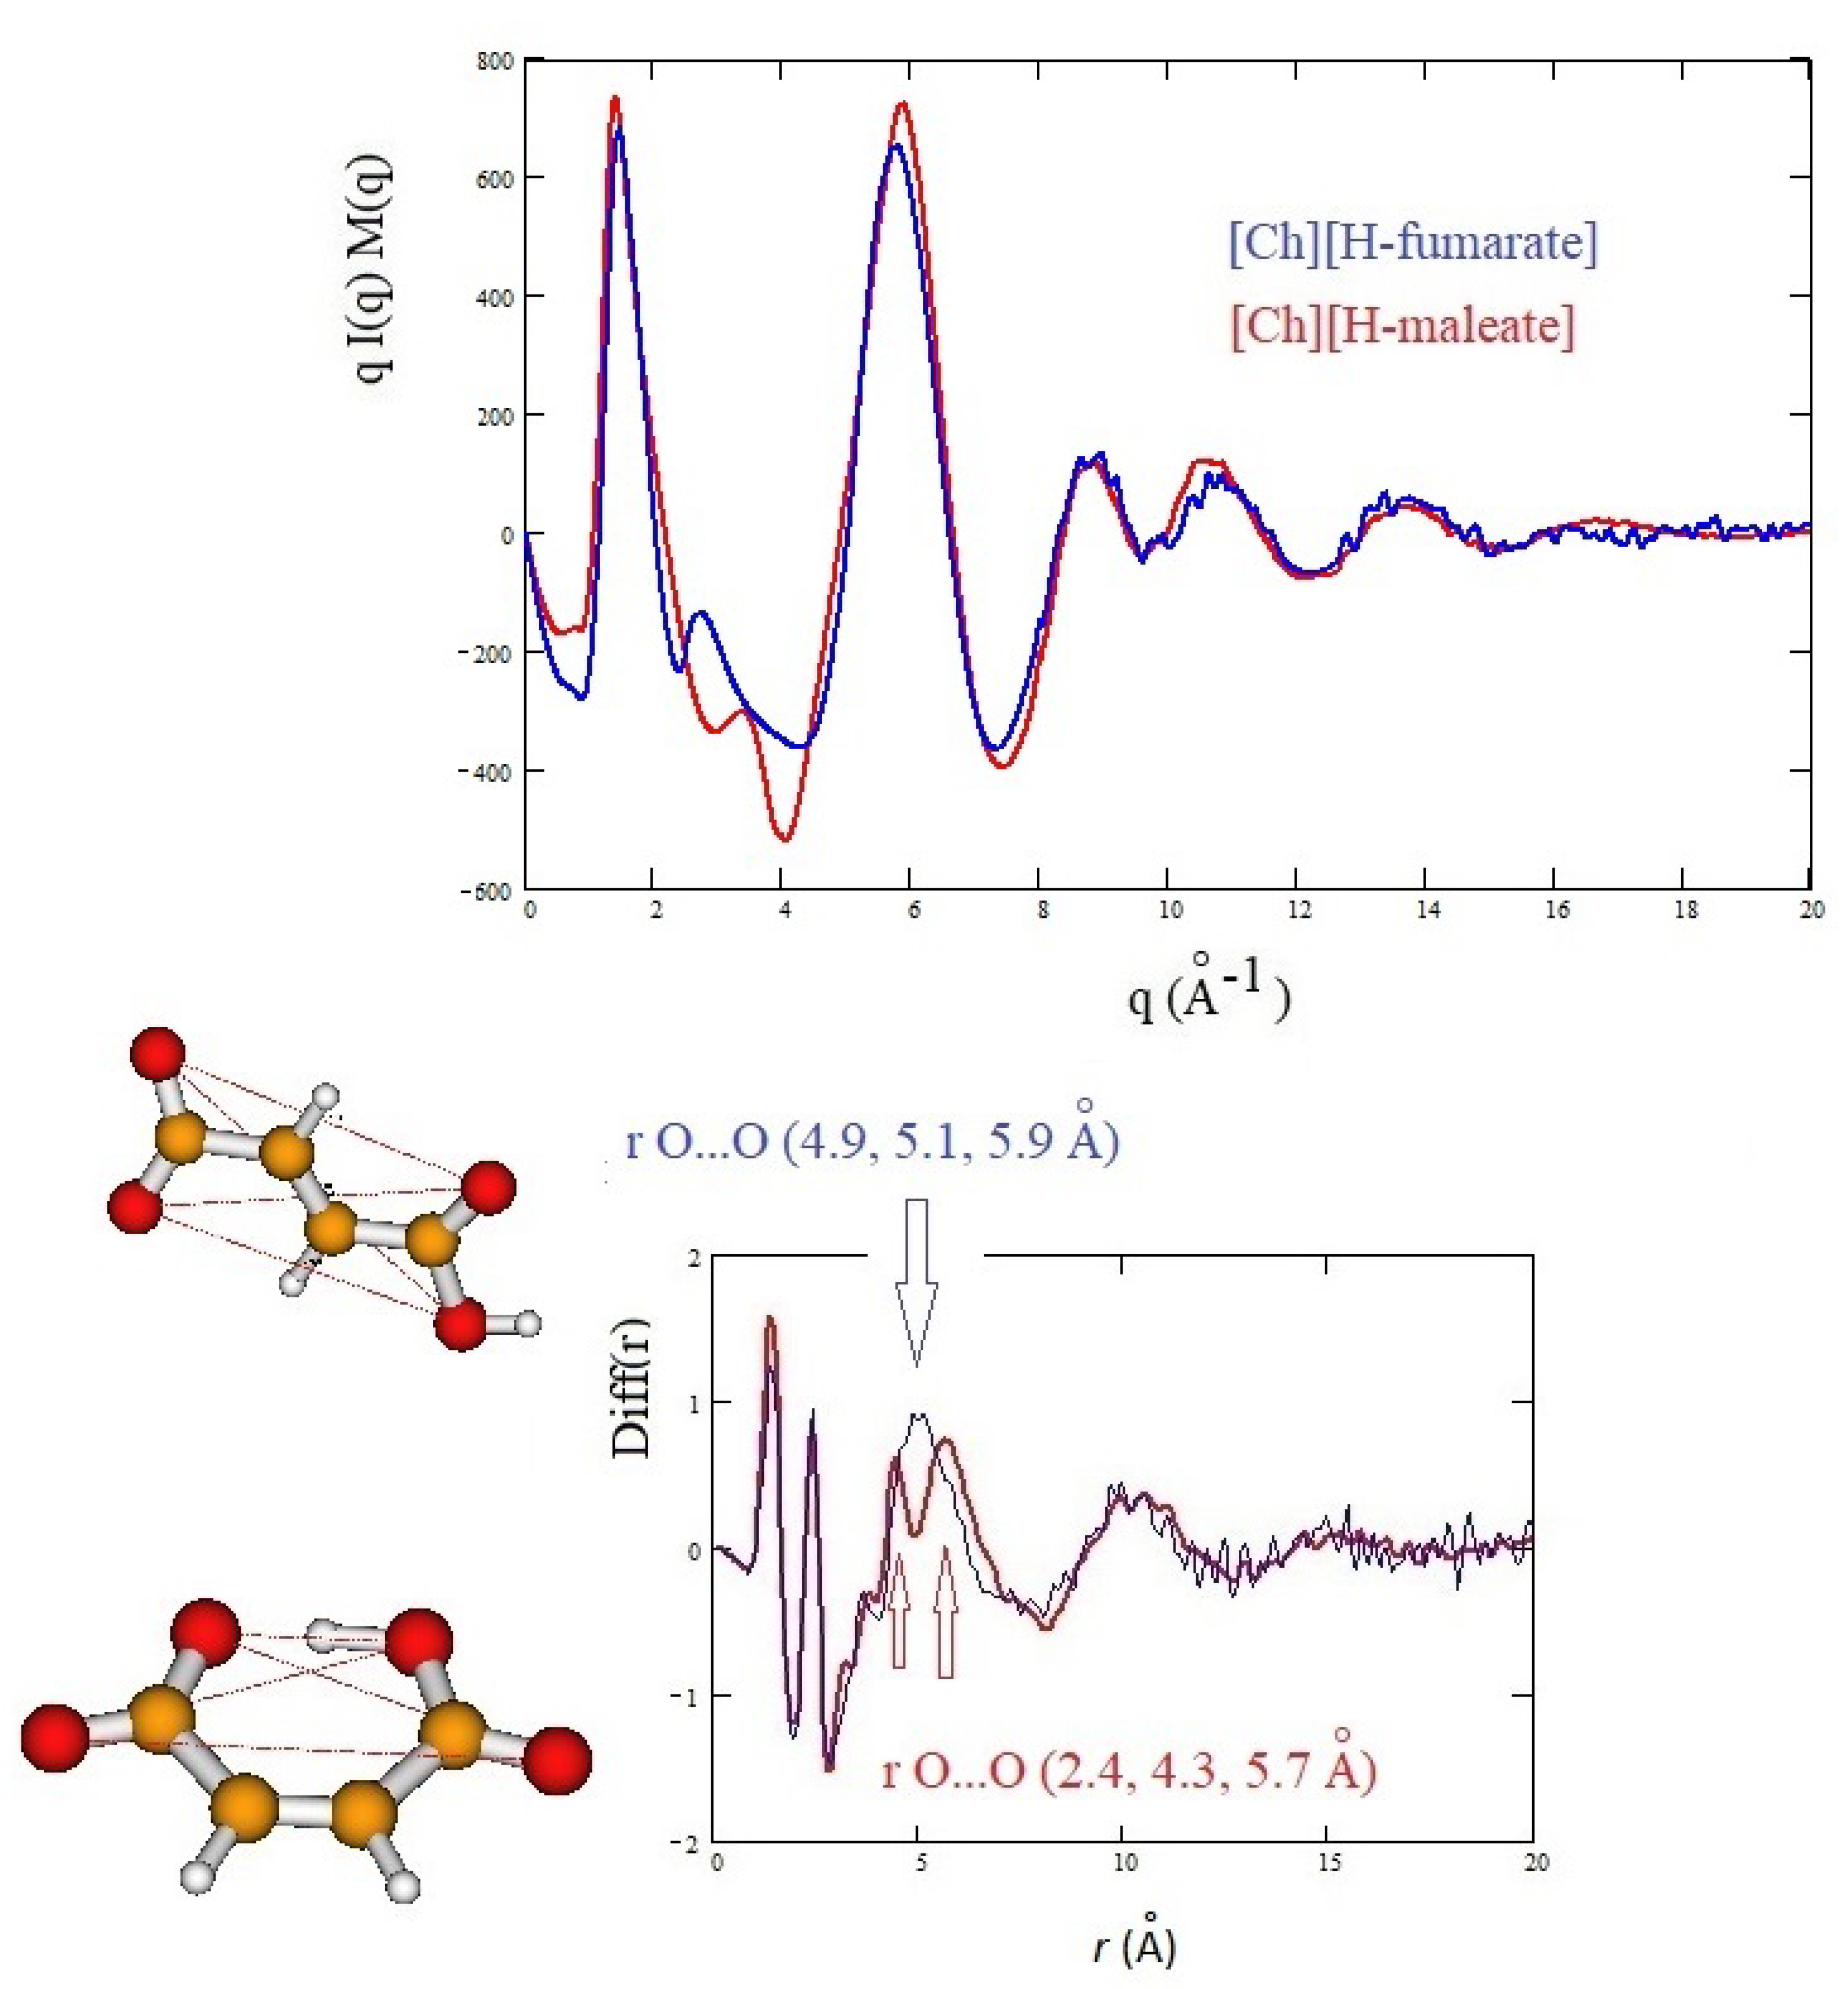 Molecules Free Full Text Choline Hydrogen Dicarboxylate Ionic Liquids By X Ray Scattering Vibrational Spectroscopy And Molecular Dynamics H Fumarate And H Maleate And Their Conformations Html